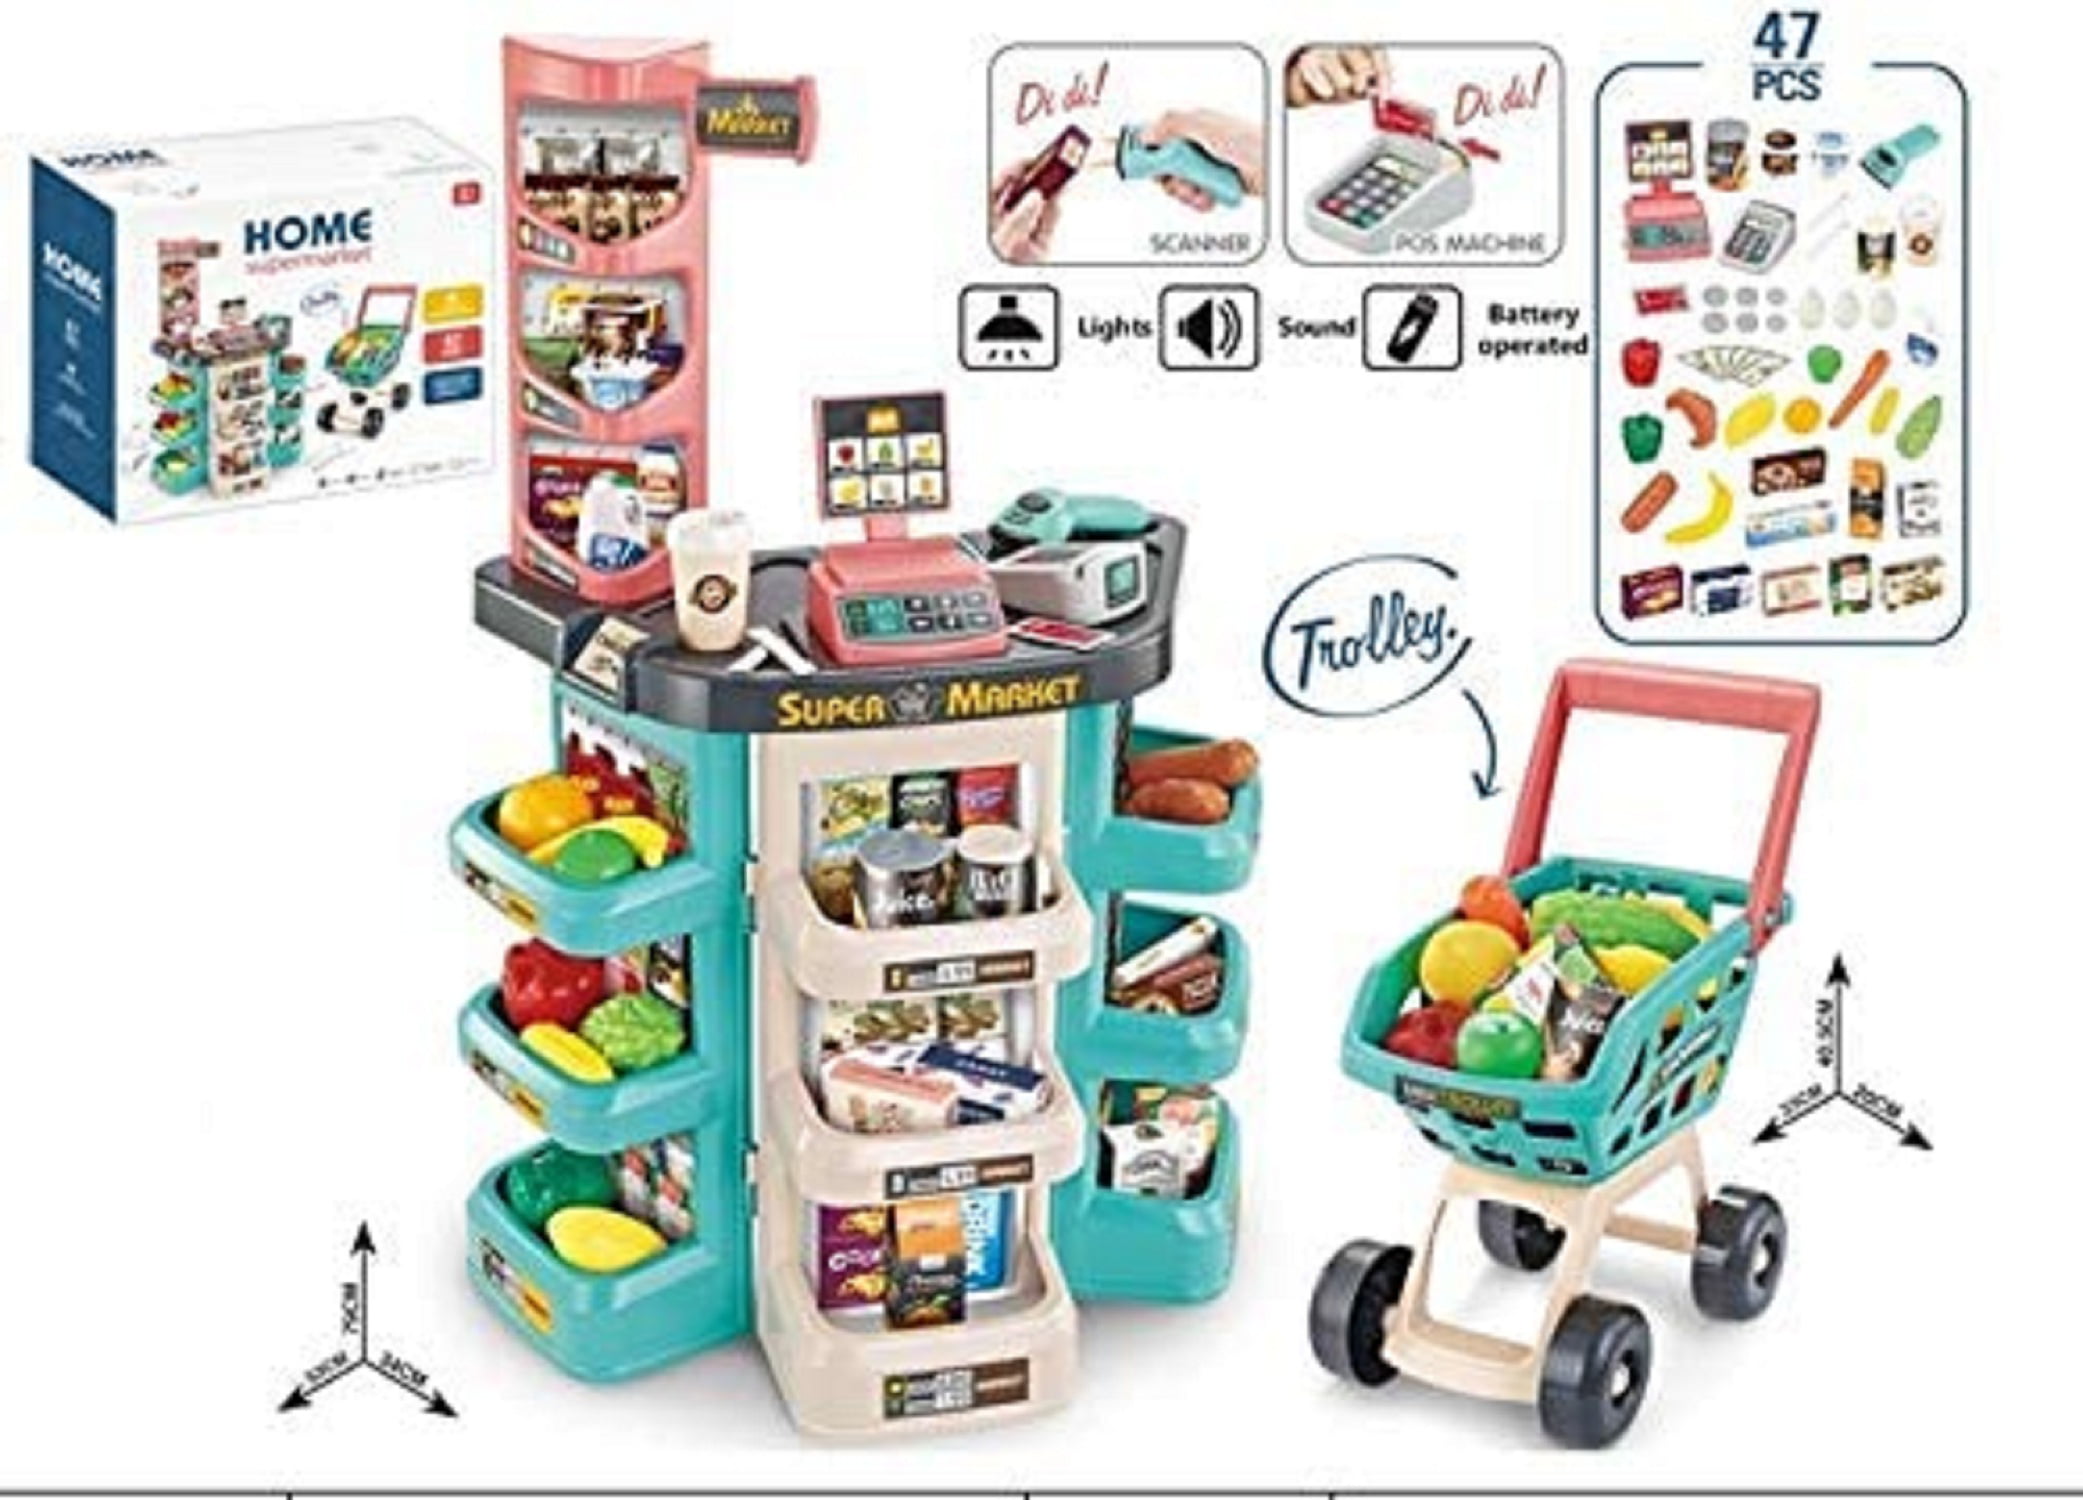 Shopping Grocery Store Playing Toy for Kids,Pretend Supermarket Store Playset with Shopping Cart Checkout Scanner,Register,Credit Card,Toddlers Educational Toy,Birthday Children Day Gift Multicolor